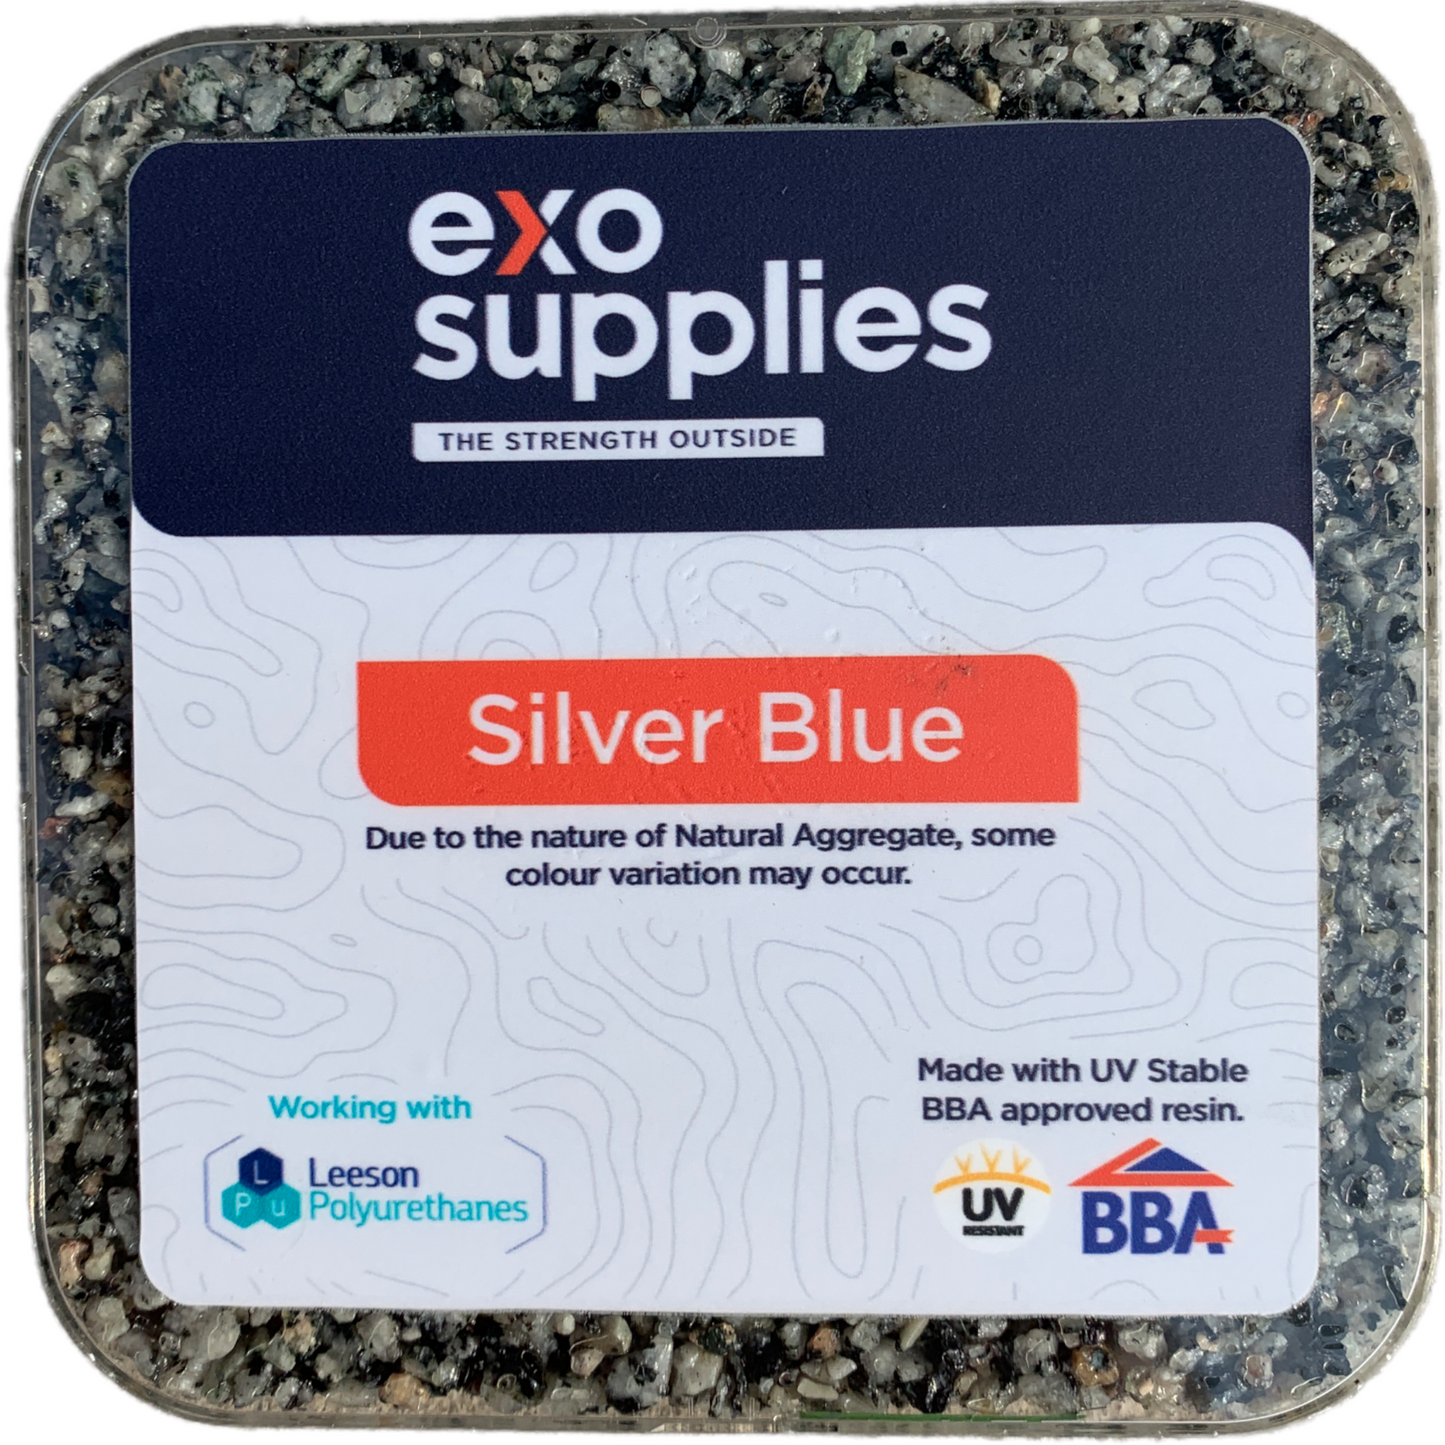 Exo Silver Blue with BBA 7.5kg UV stable Resin